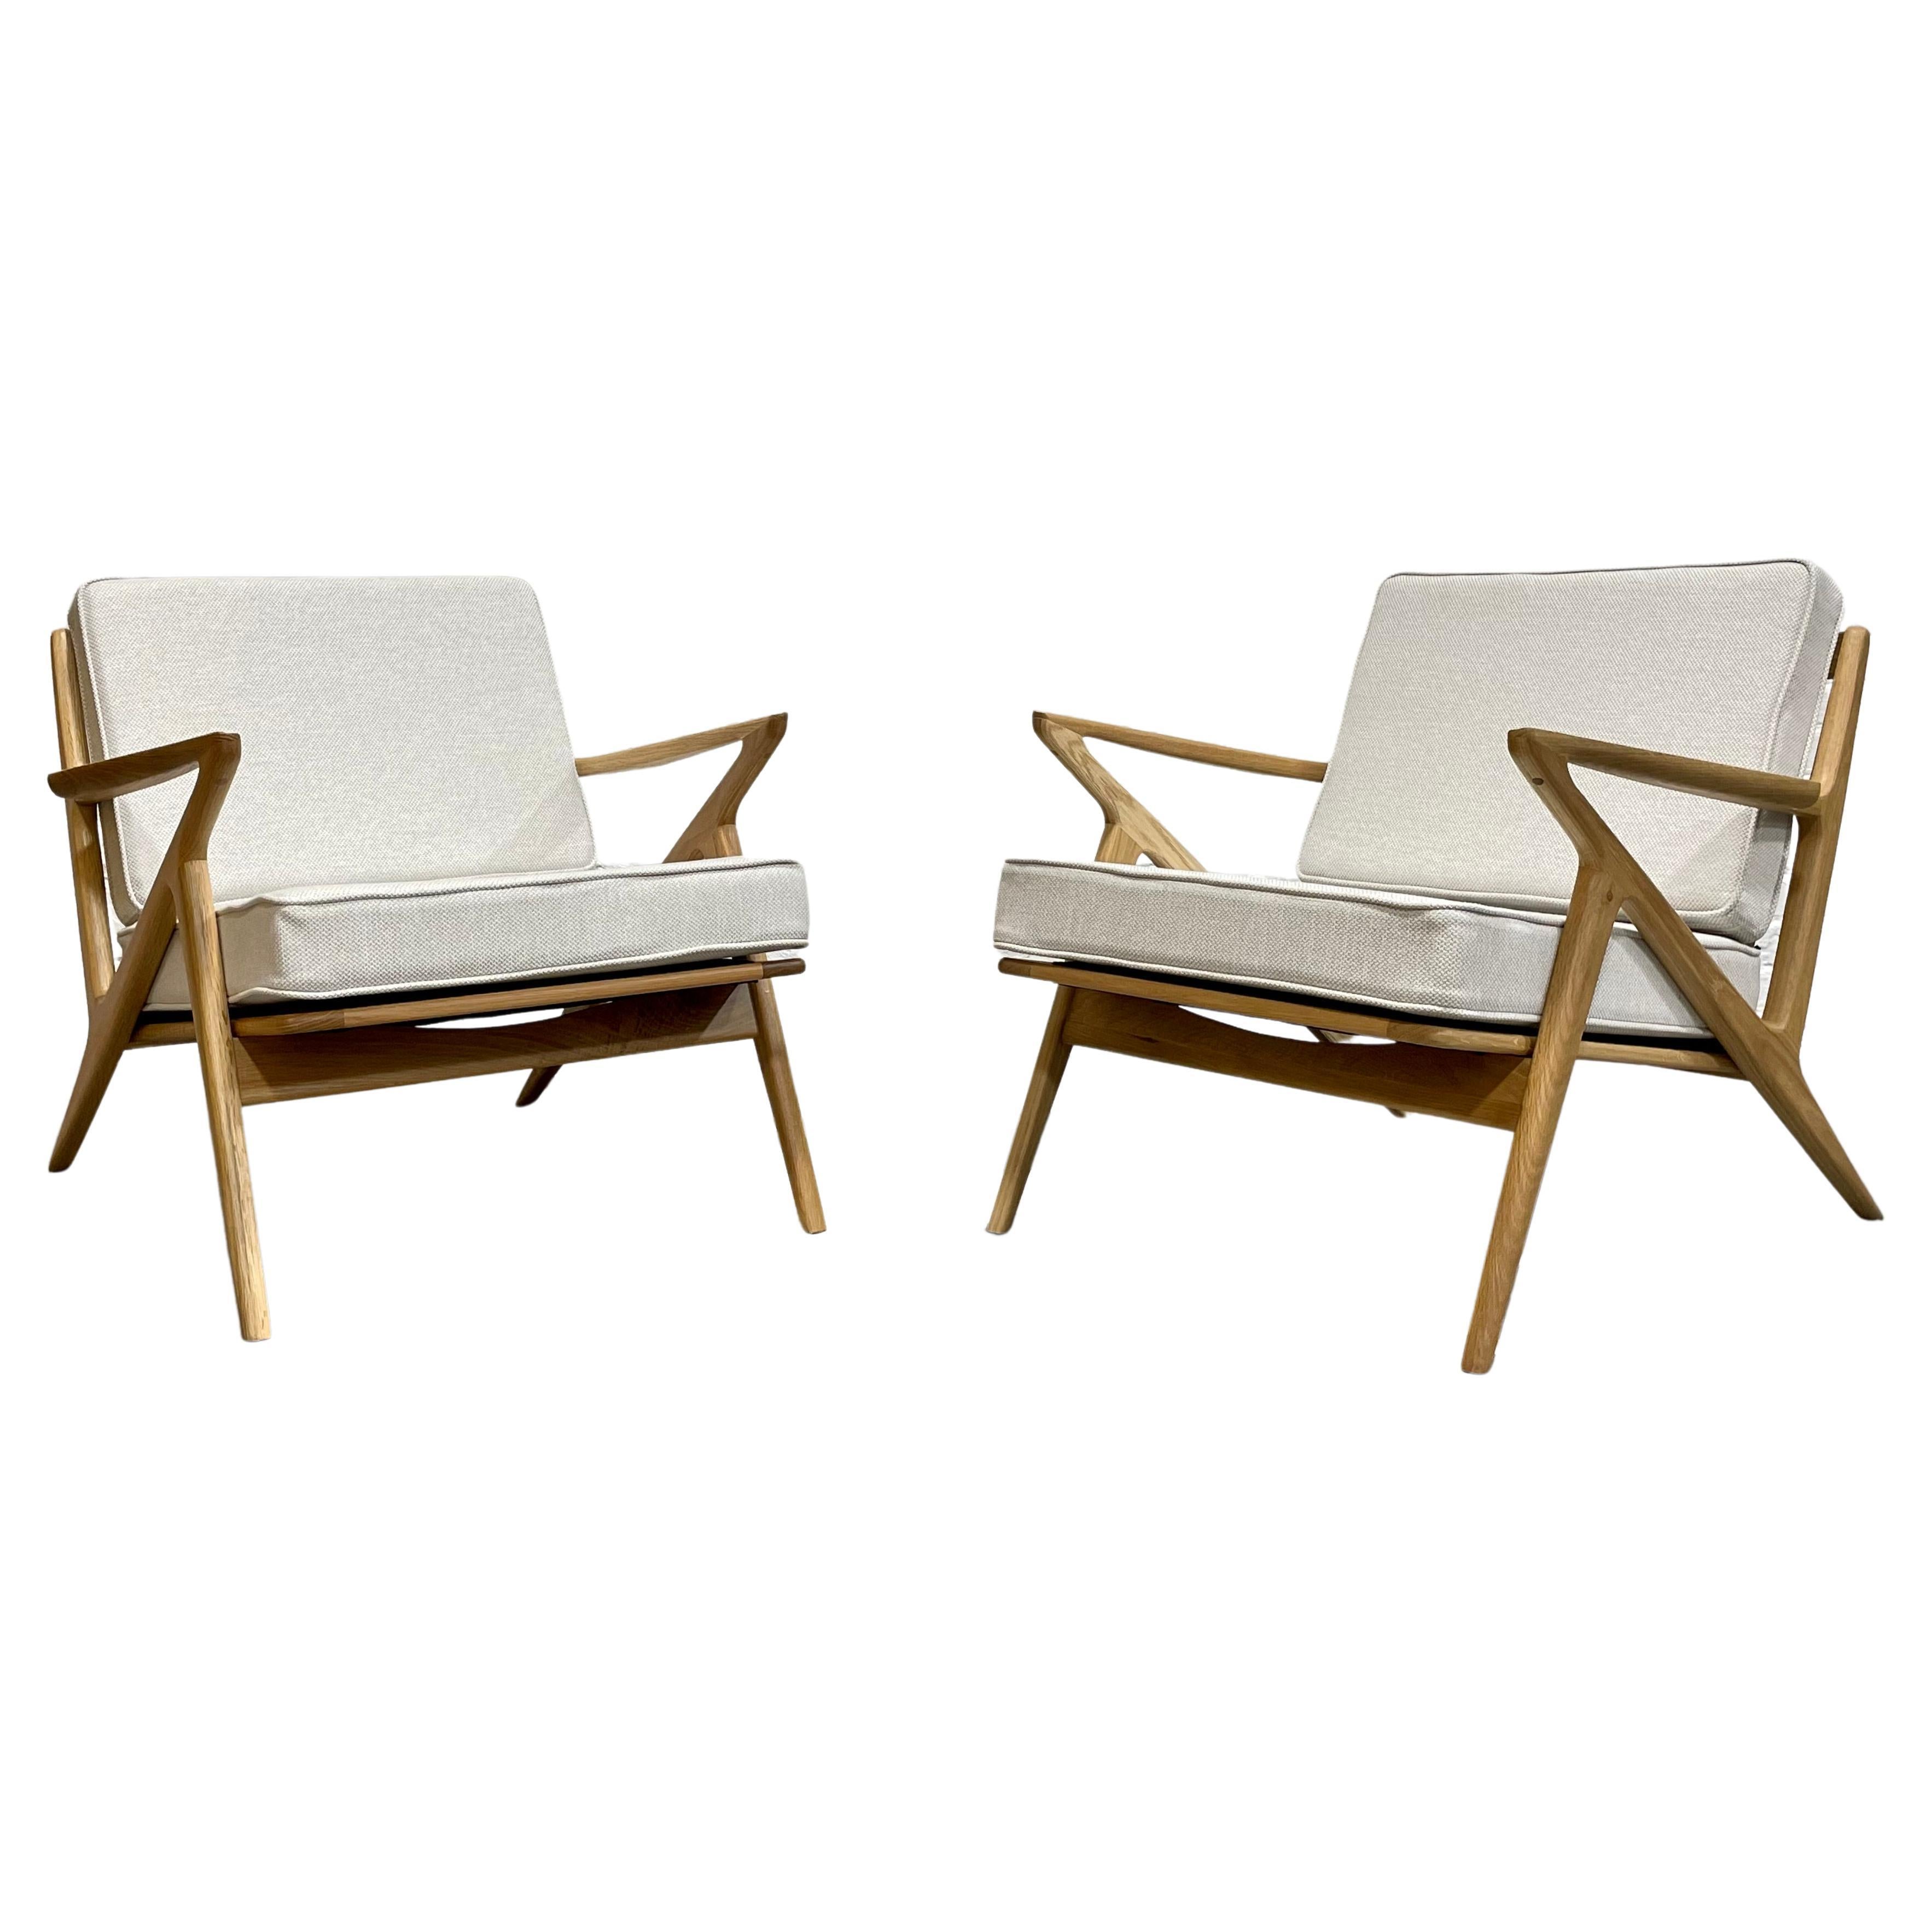 Mid-Century Modern Styled Handcrafted Oak Lounge Chairs, a Pair